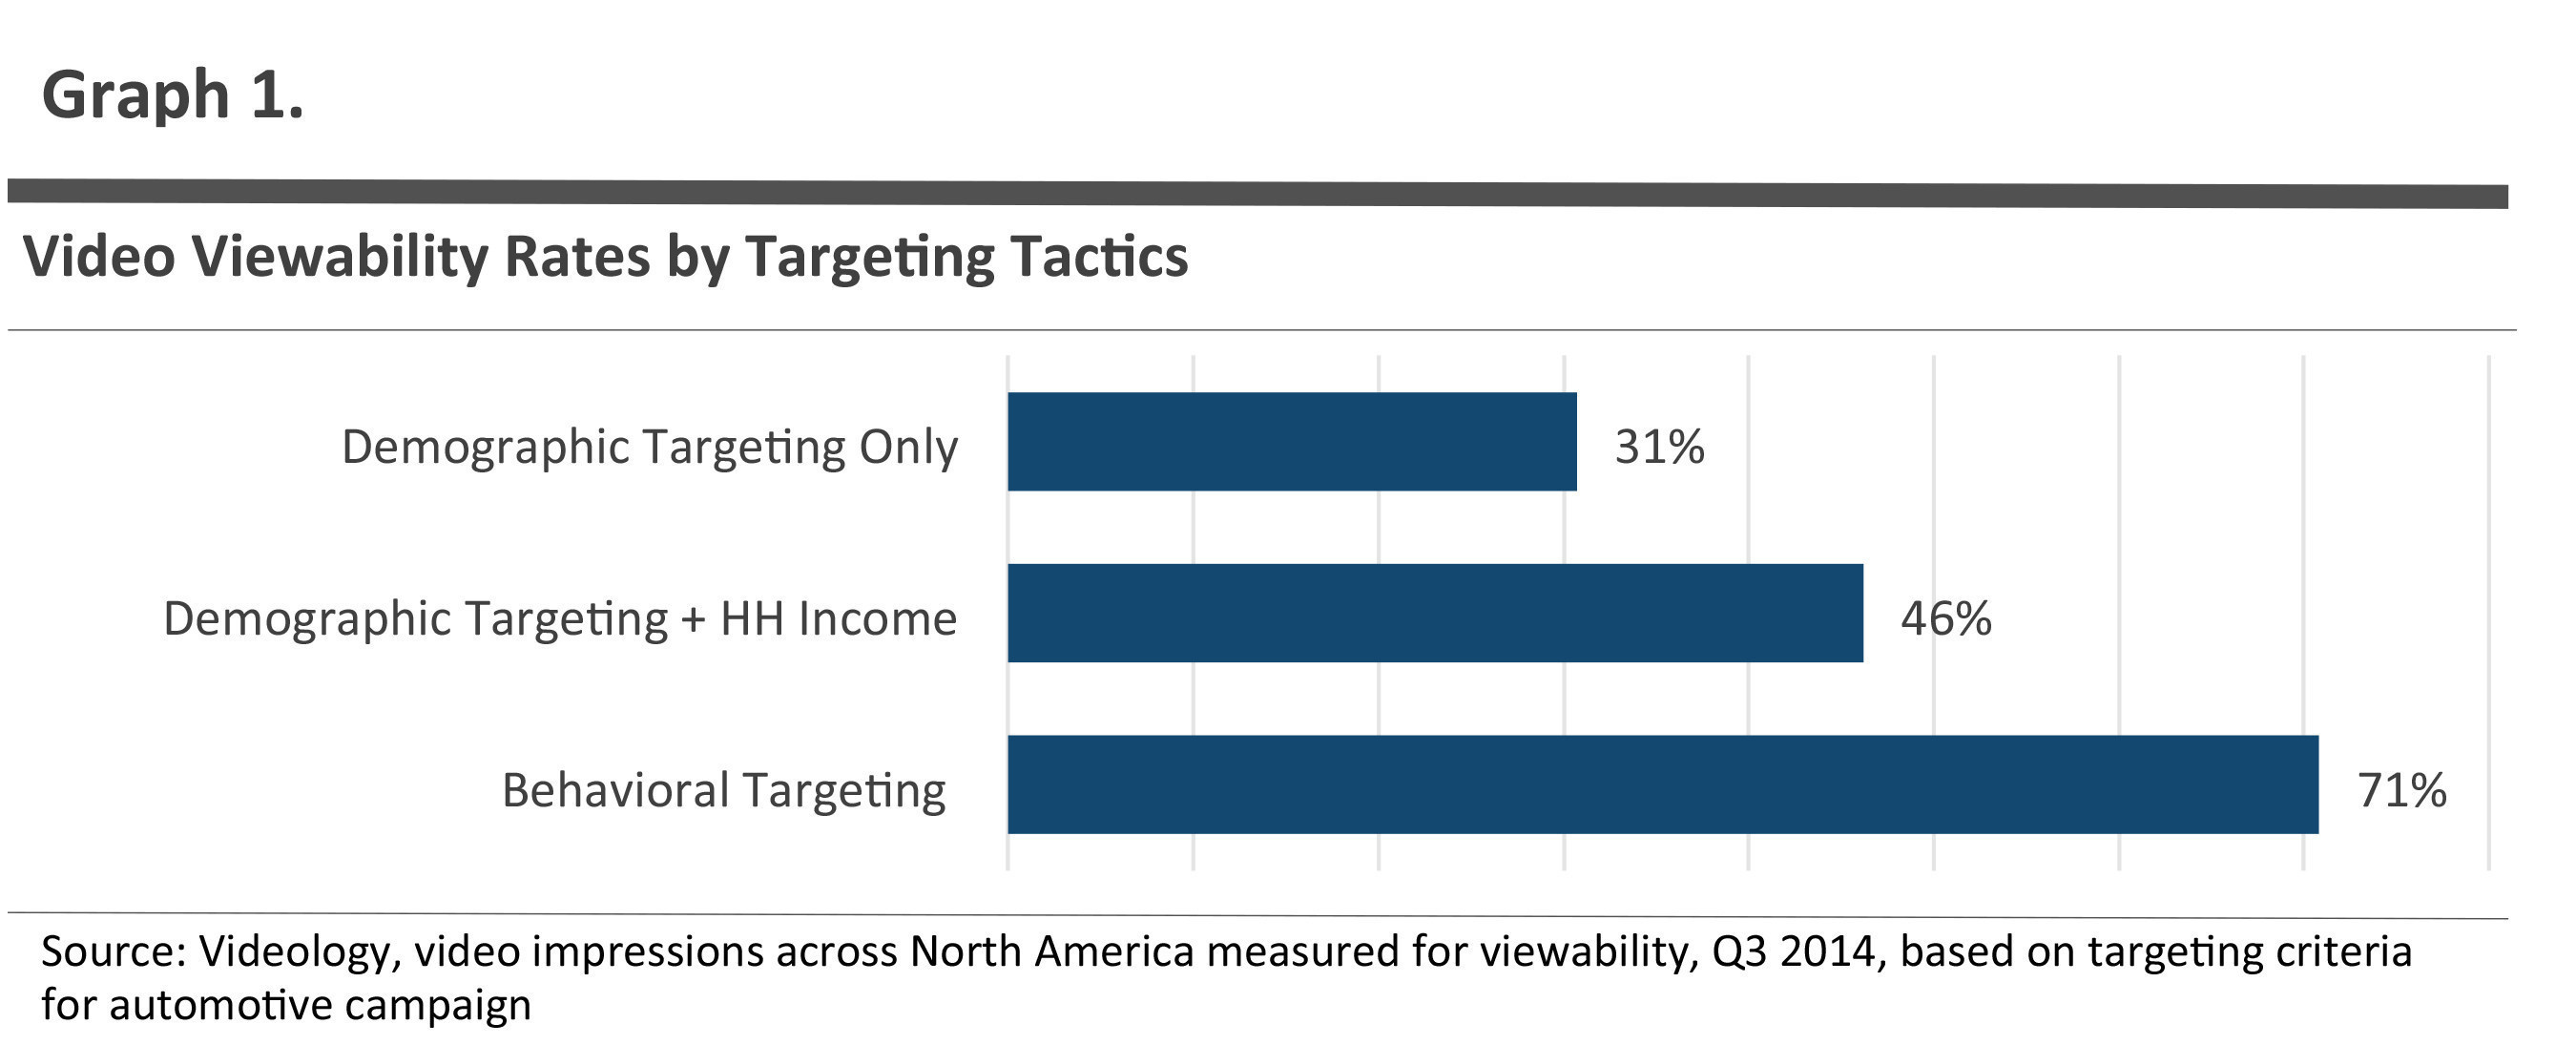 Advanced ad targeting, and subsequently ad relevancy, improved viewability rankings significantly compared to those targeted by demographics only.